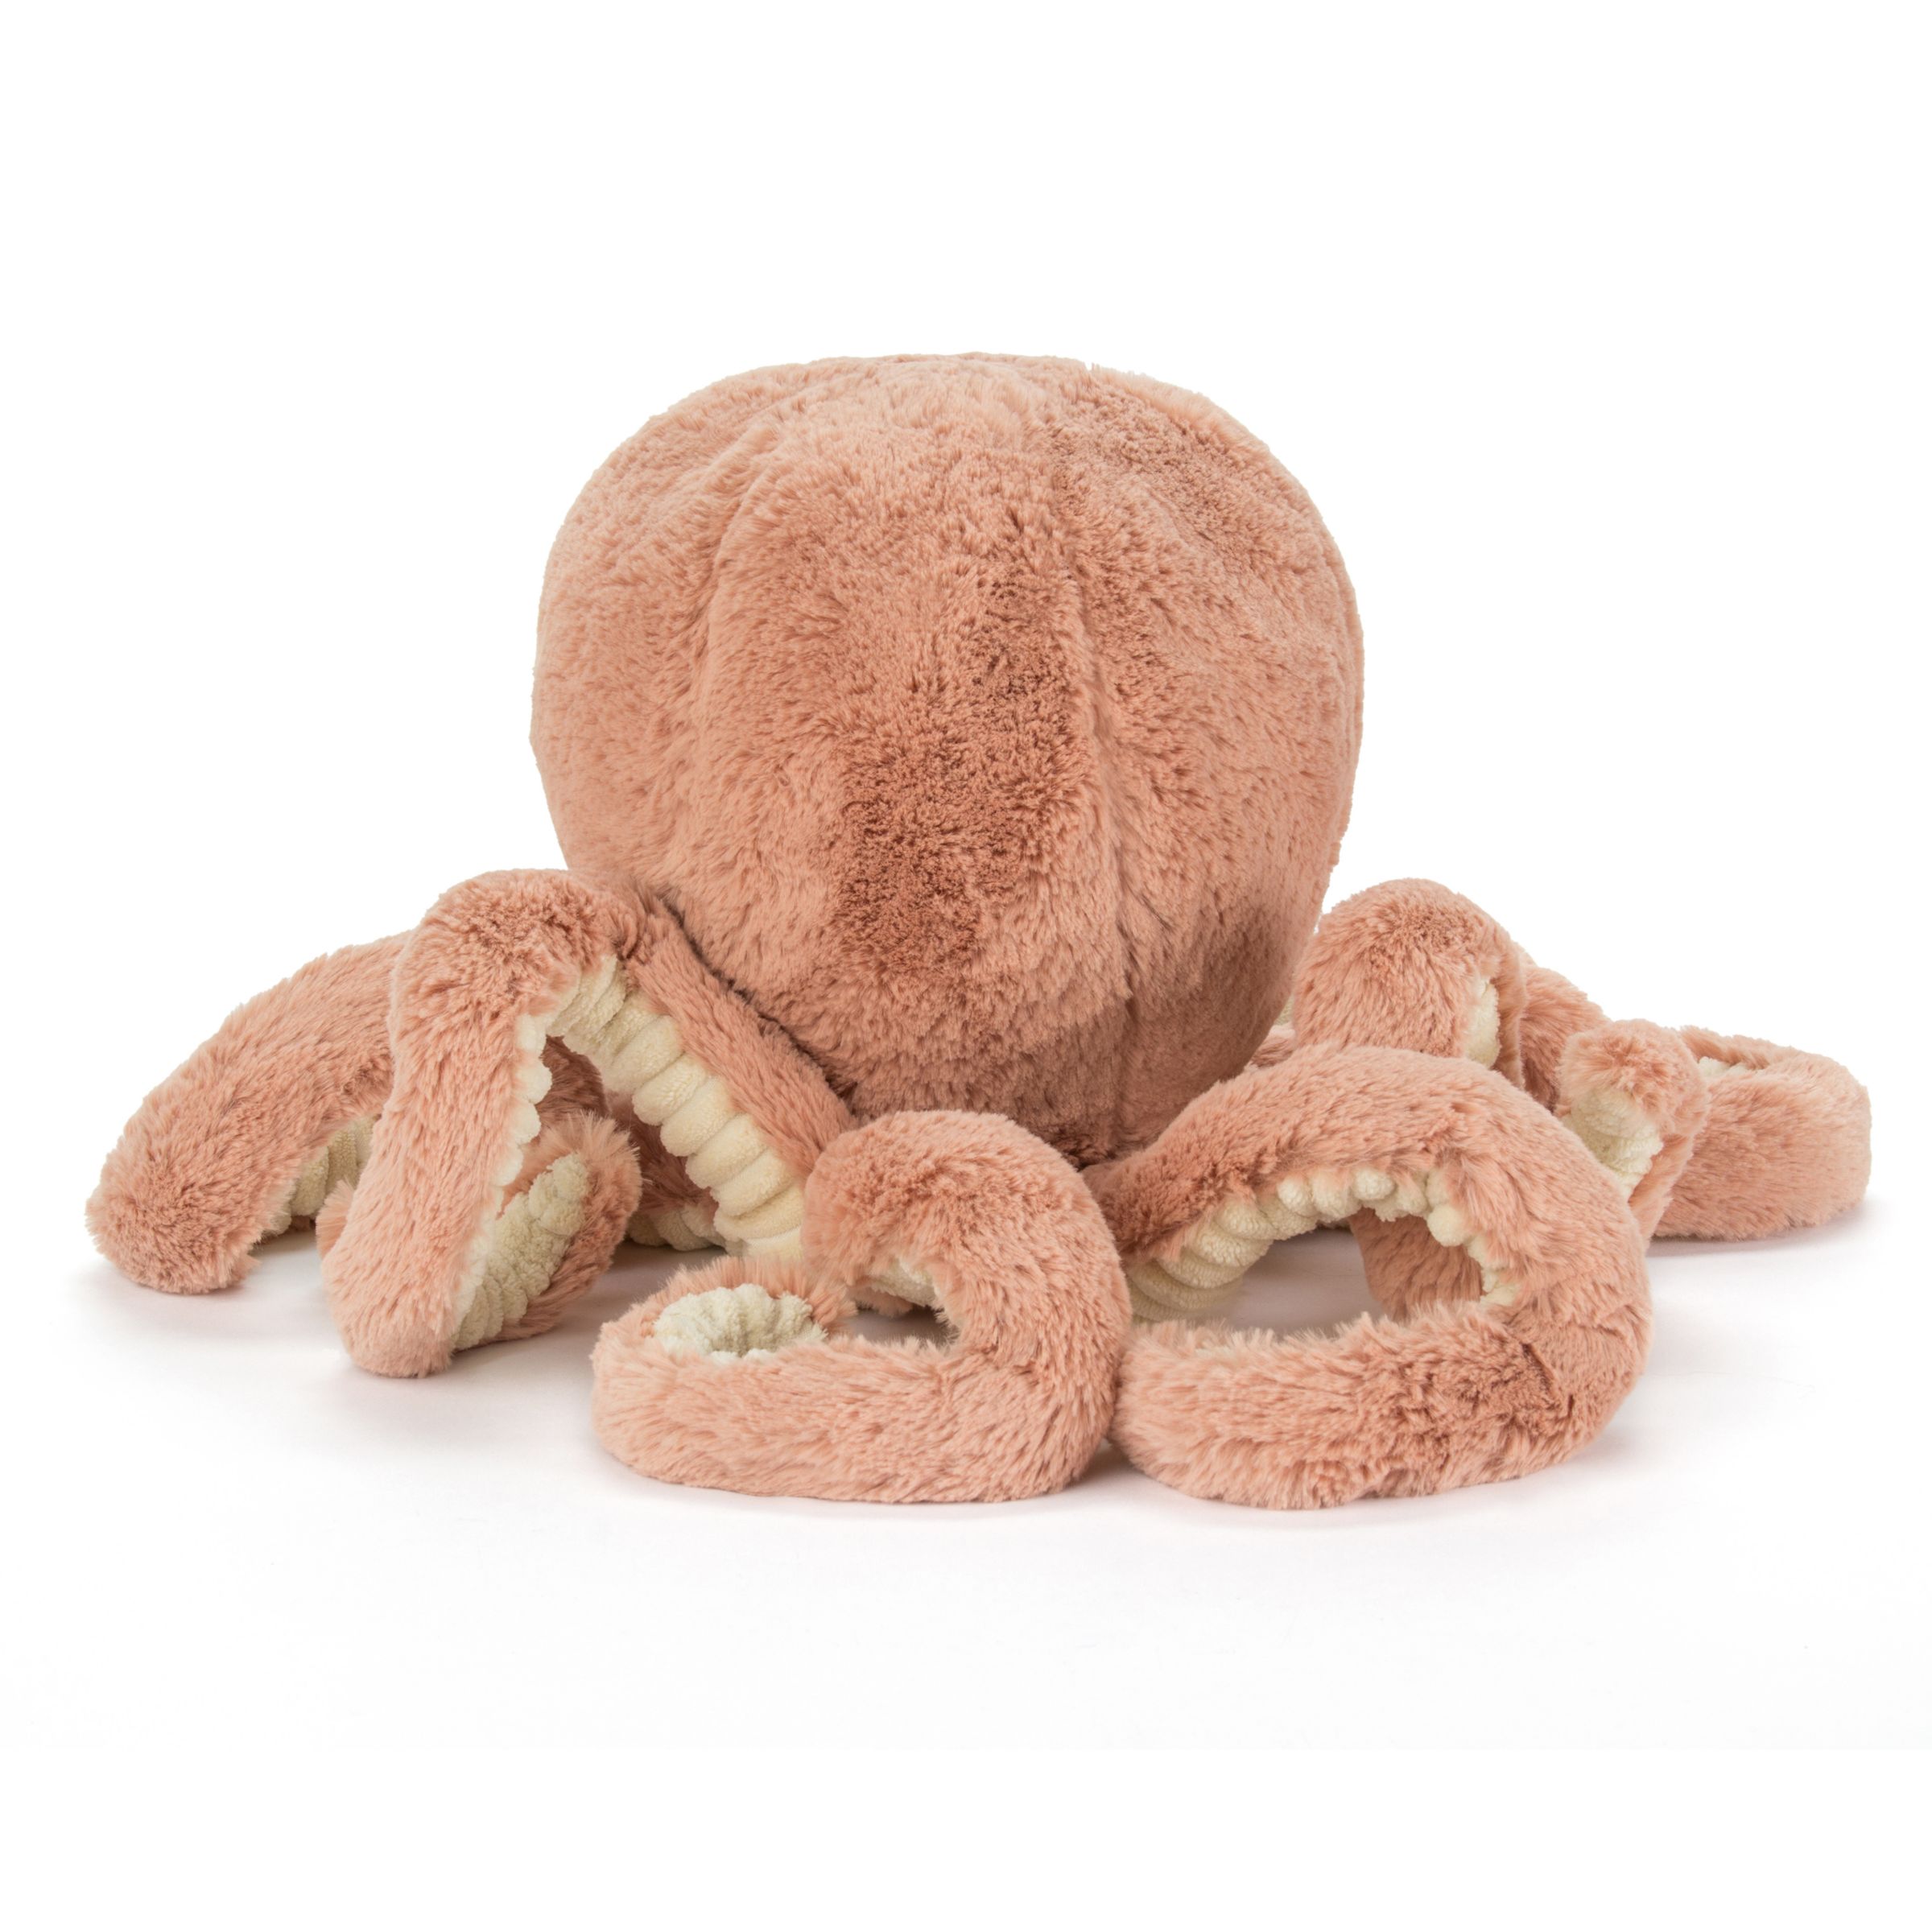 jellycat odell octopus small